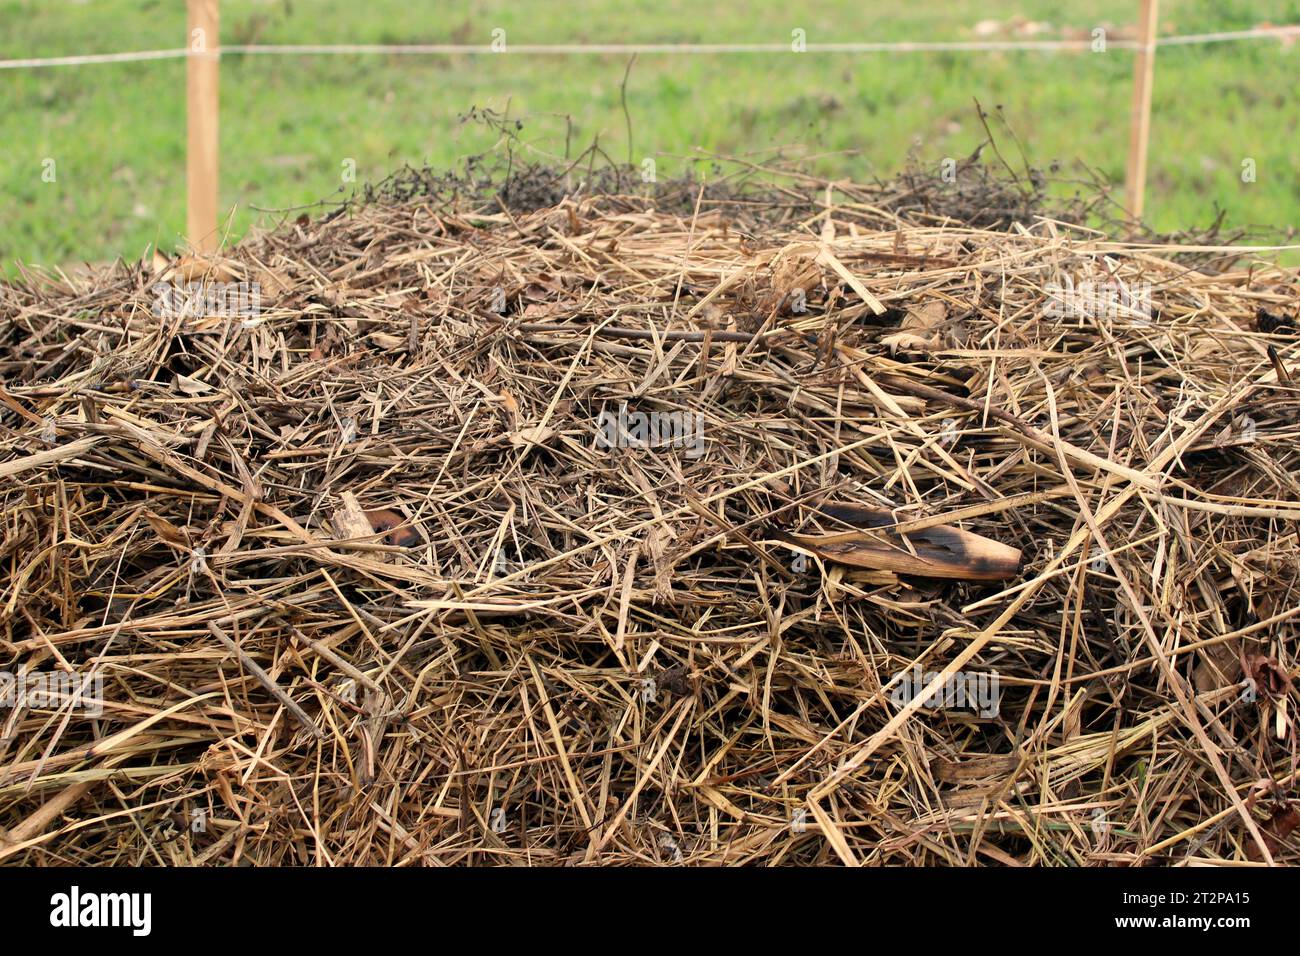 Close-up view of the layer of straw, or dry grass, from a compost windrow, used to cover decomposing organic material through the composting process. Stock Photo